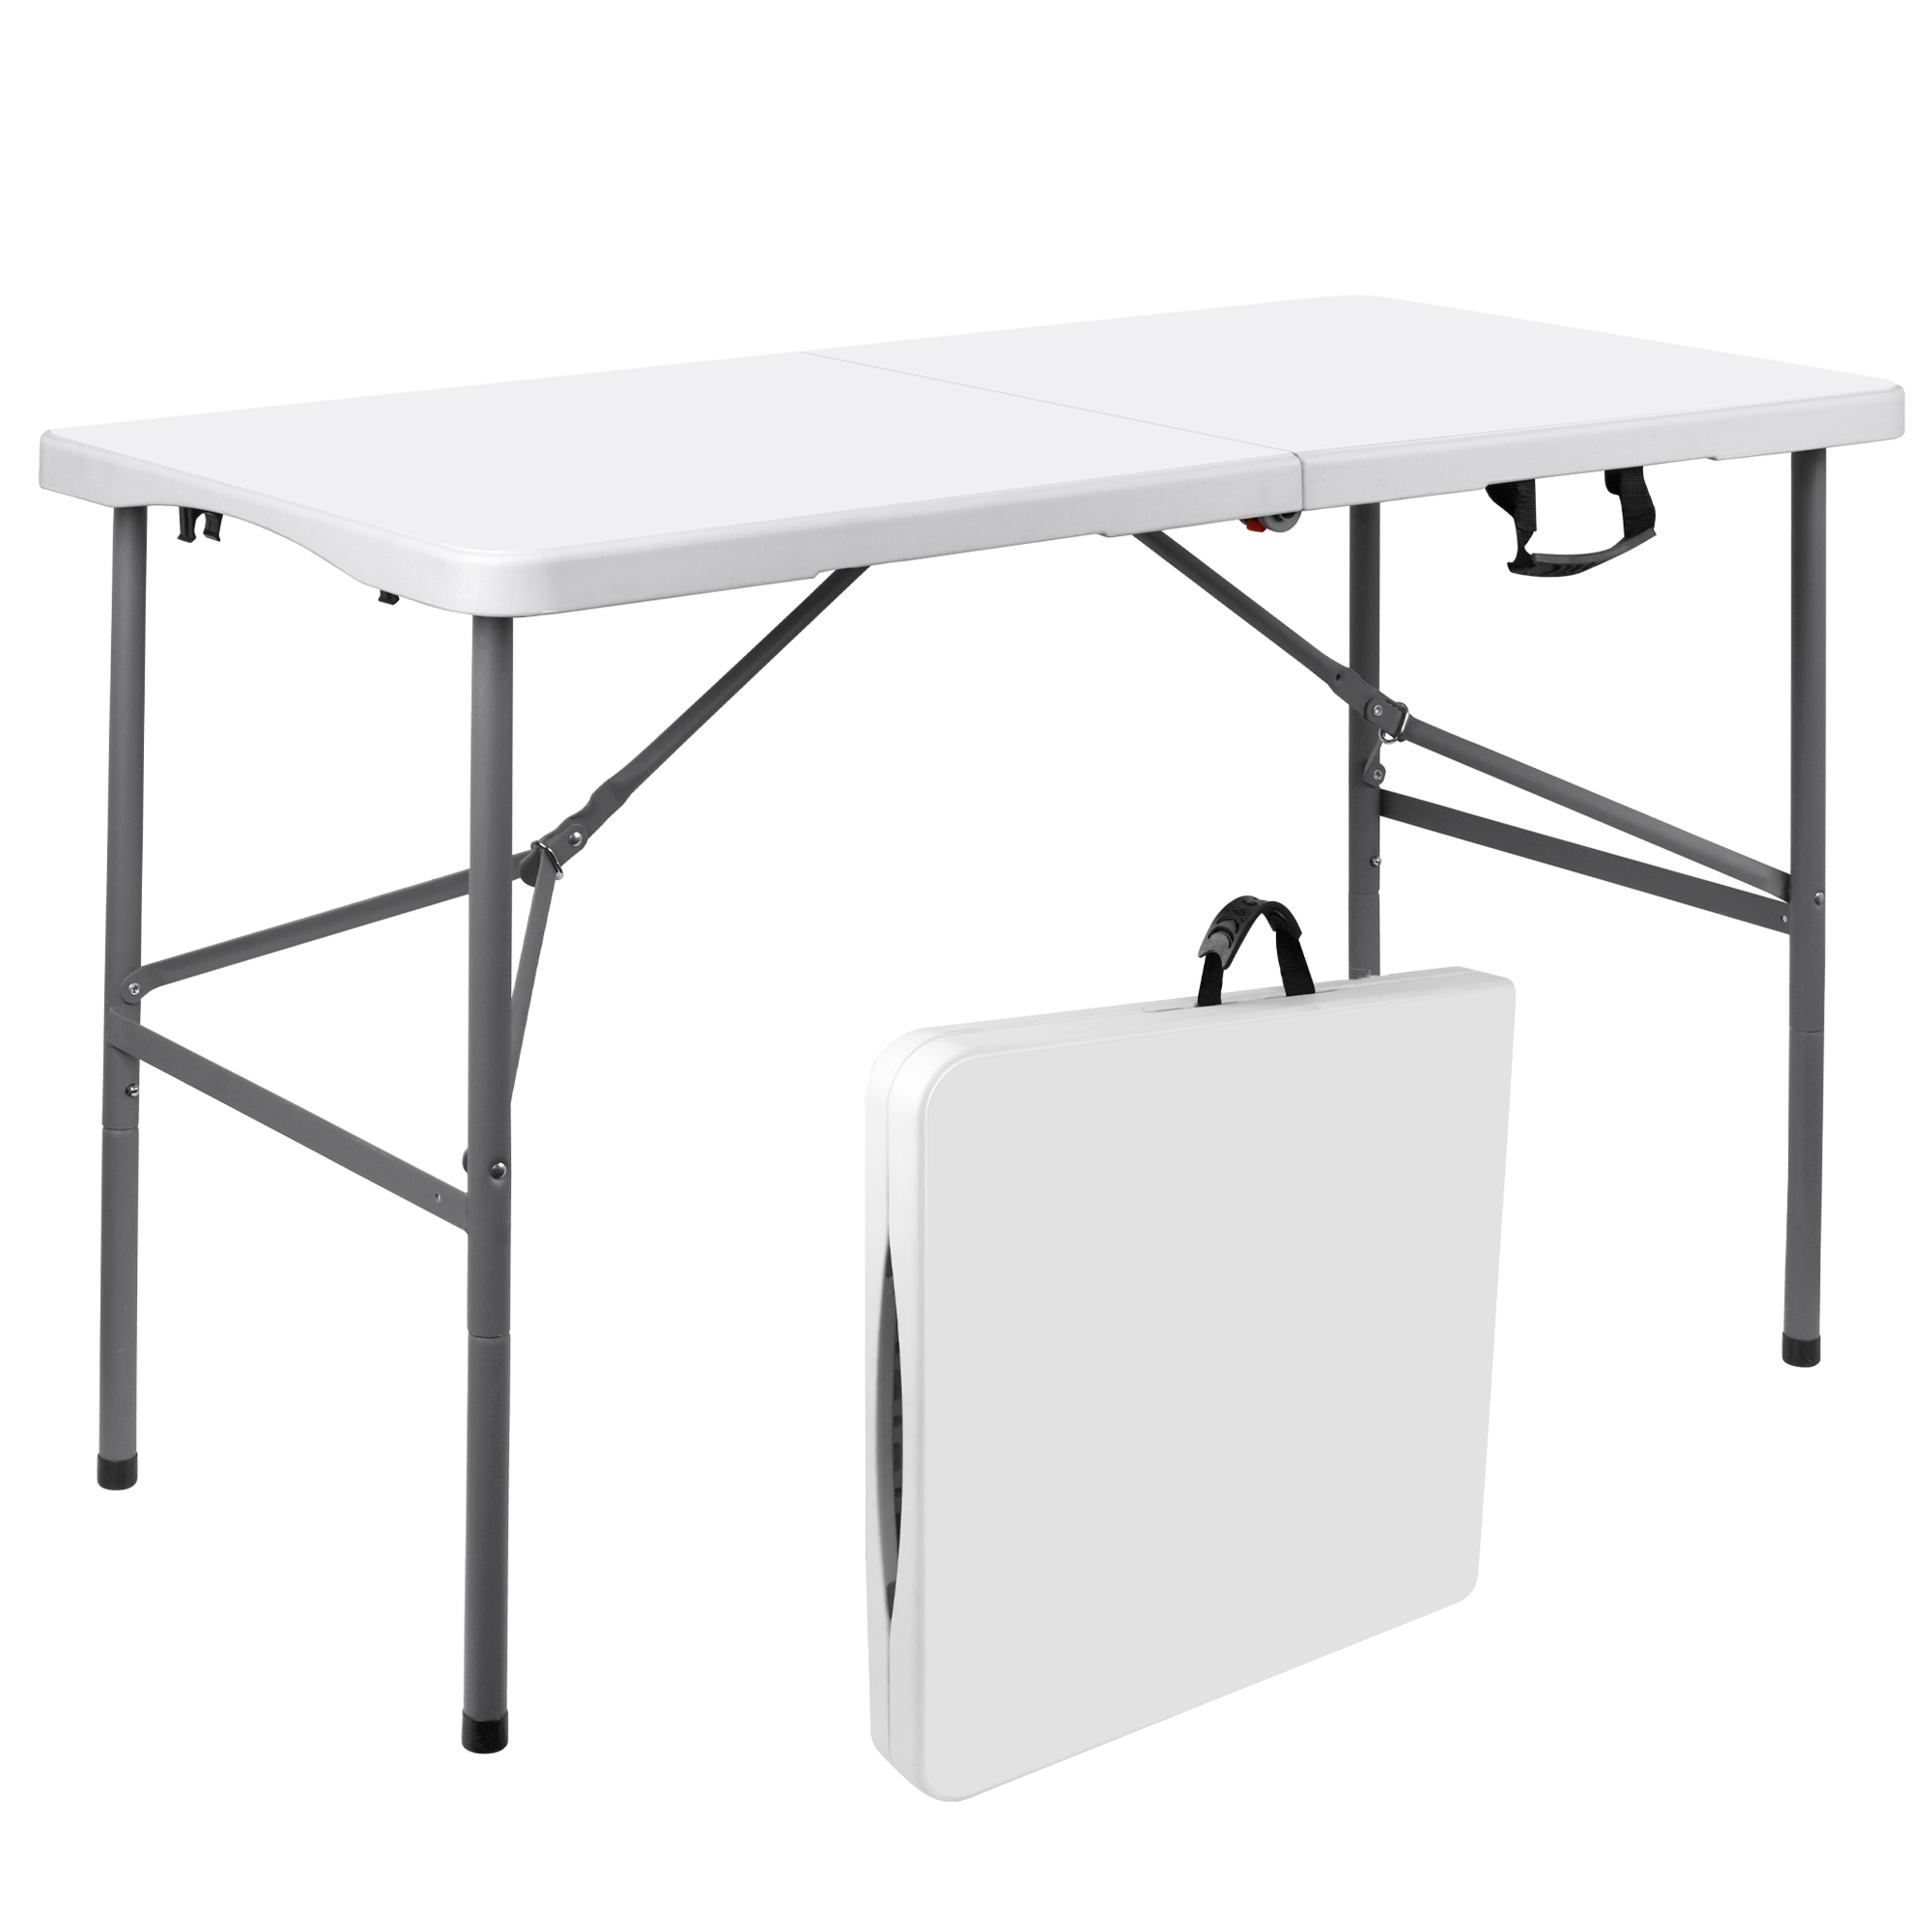 

6 Ft Folding Table, Lightweight Folding Table For Party, Dining, Barbecue, Board Game With Carrying Handle, Folding Locks - White